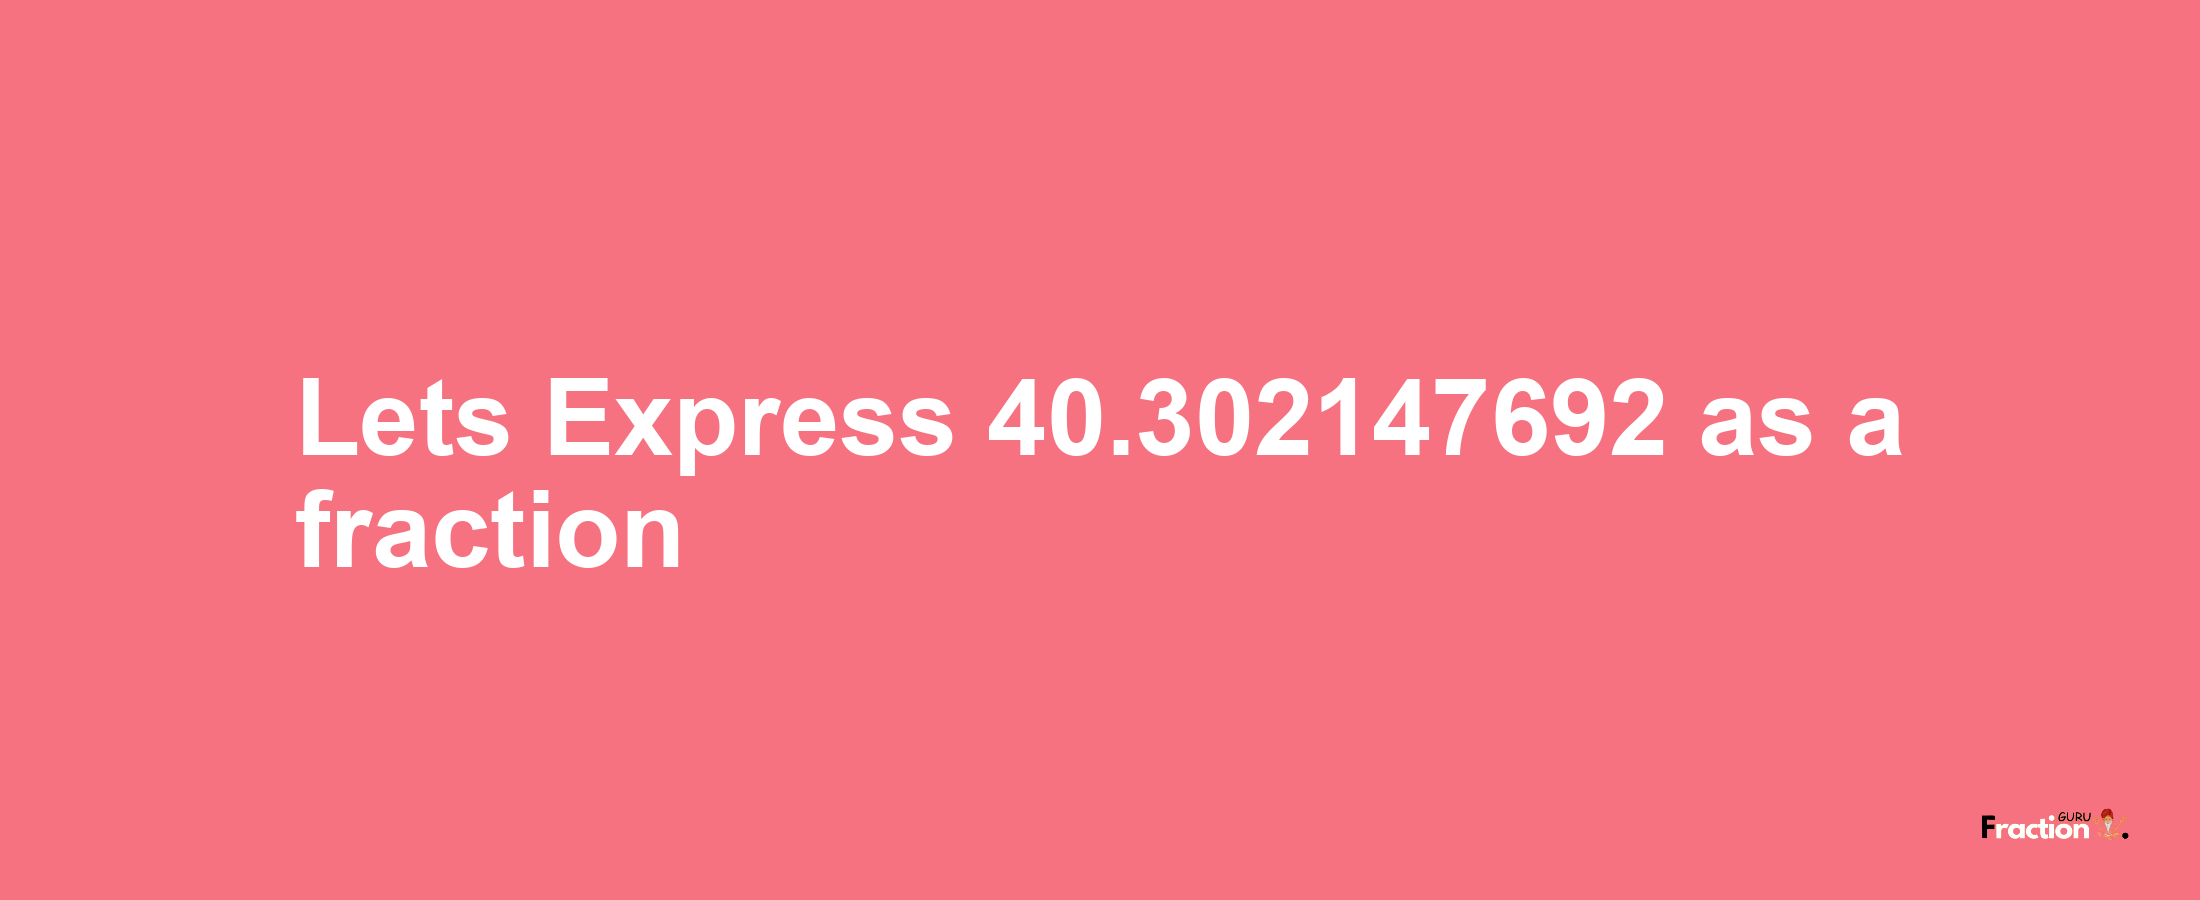 Lets Express 40.302147692 as afraction